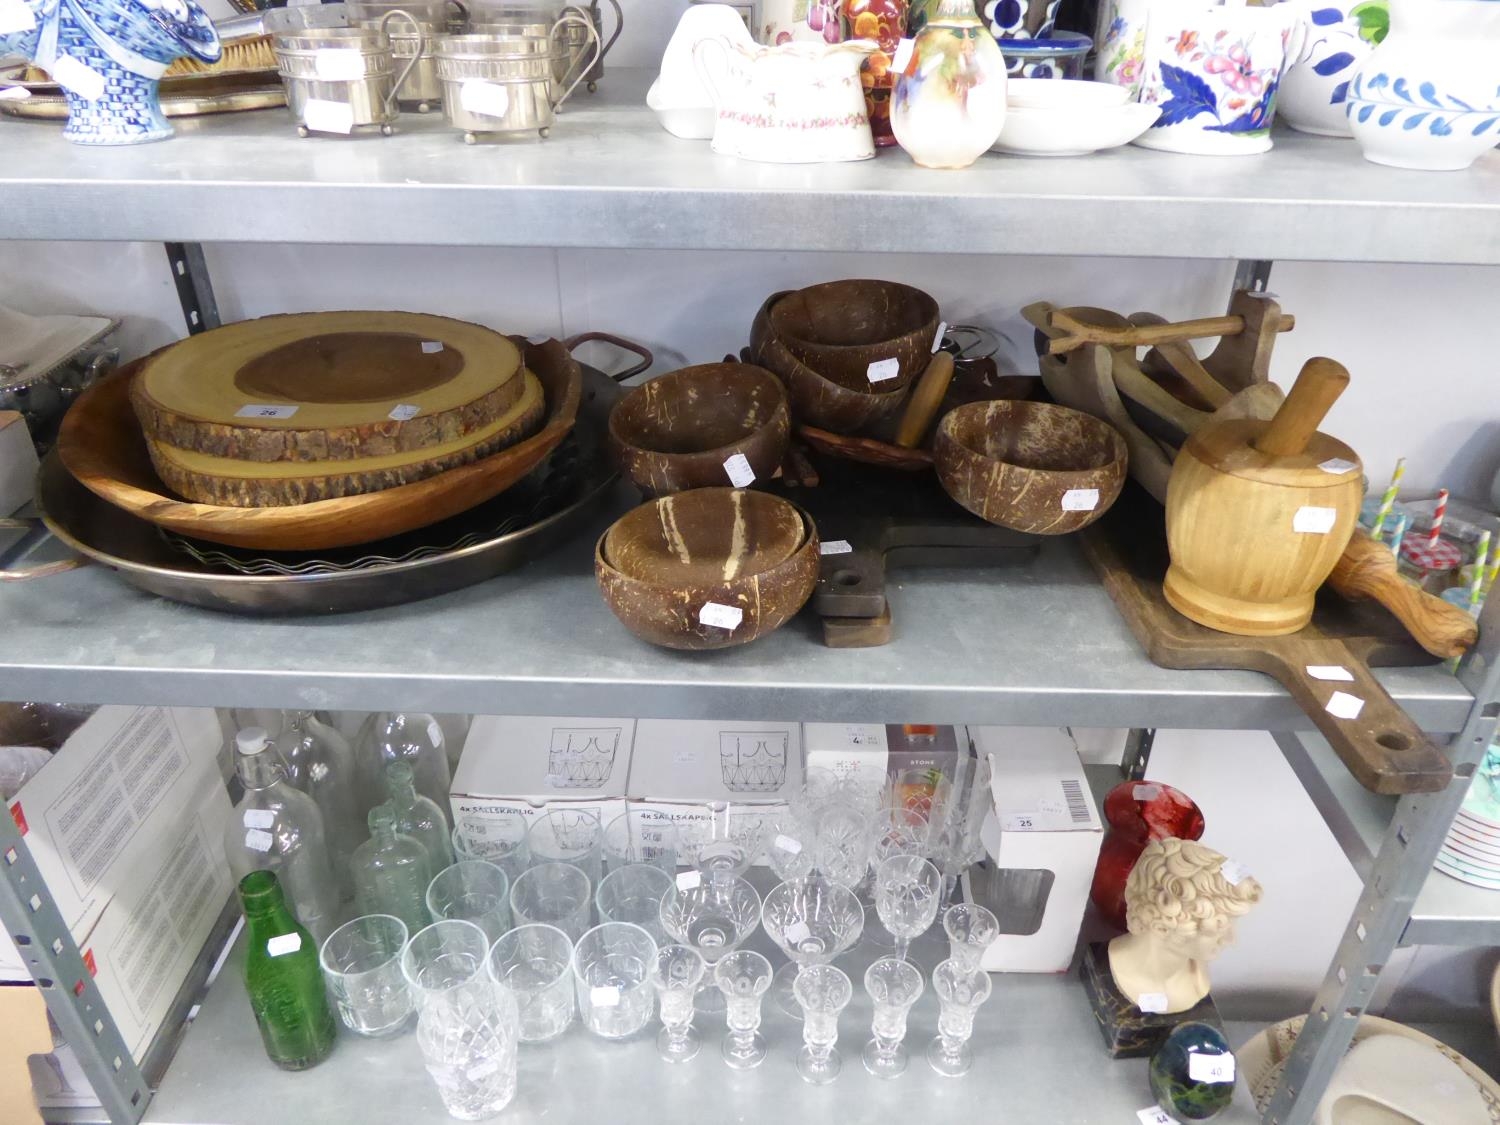 ASSORTED WOODEN UTENSILS, COCONUT BOWLS, WAVY EDGED BOARDS, PAELLA PAN ETC.....